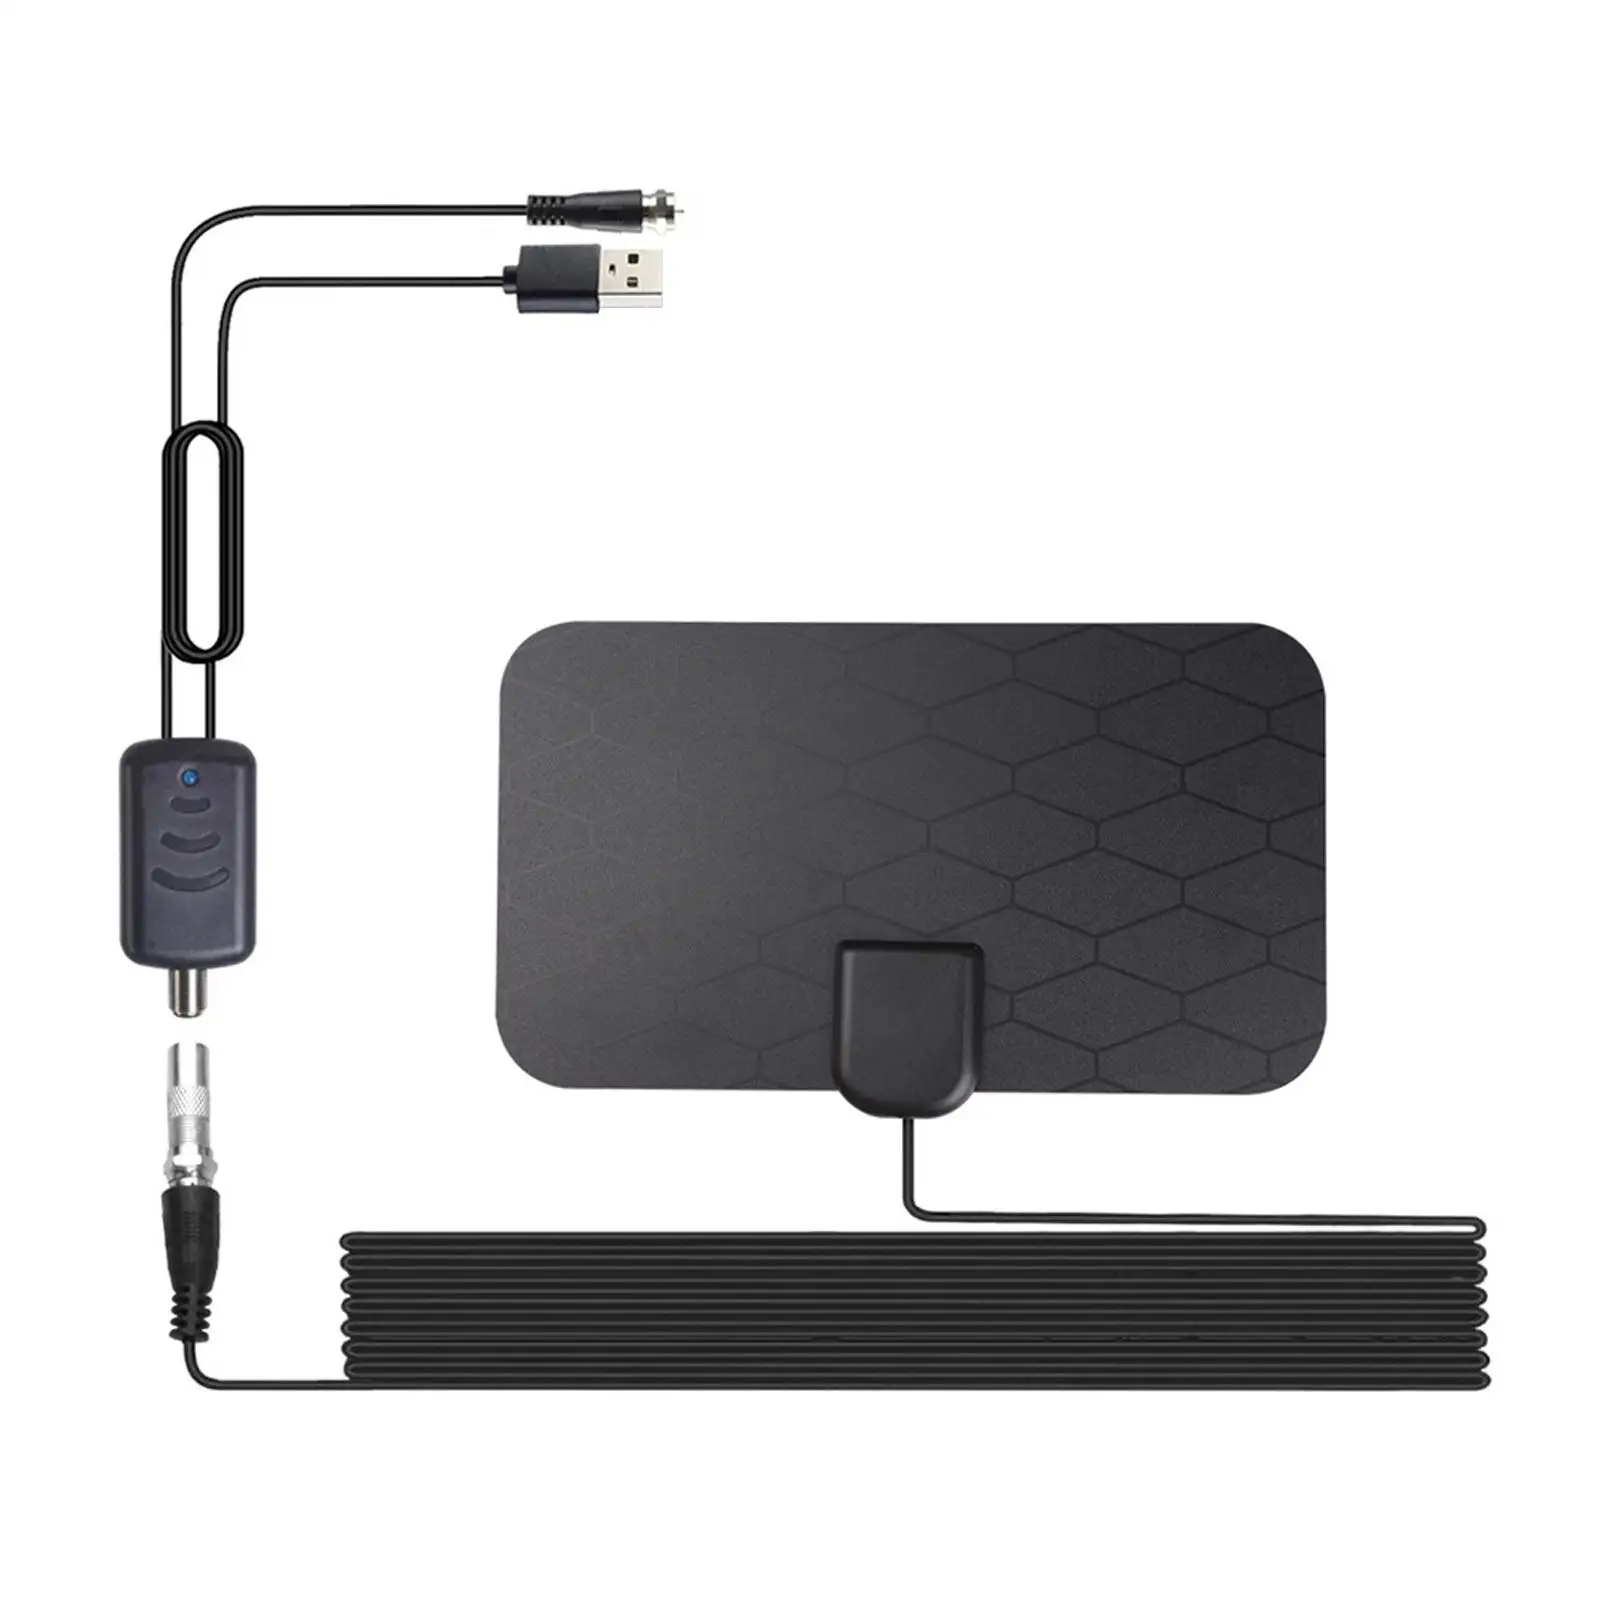  Digital Indoor Amplified TV Antenna W/ Free View Television Local Channels Smart HDTV Antenna